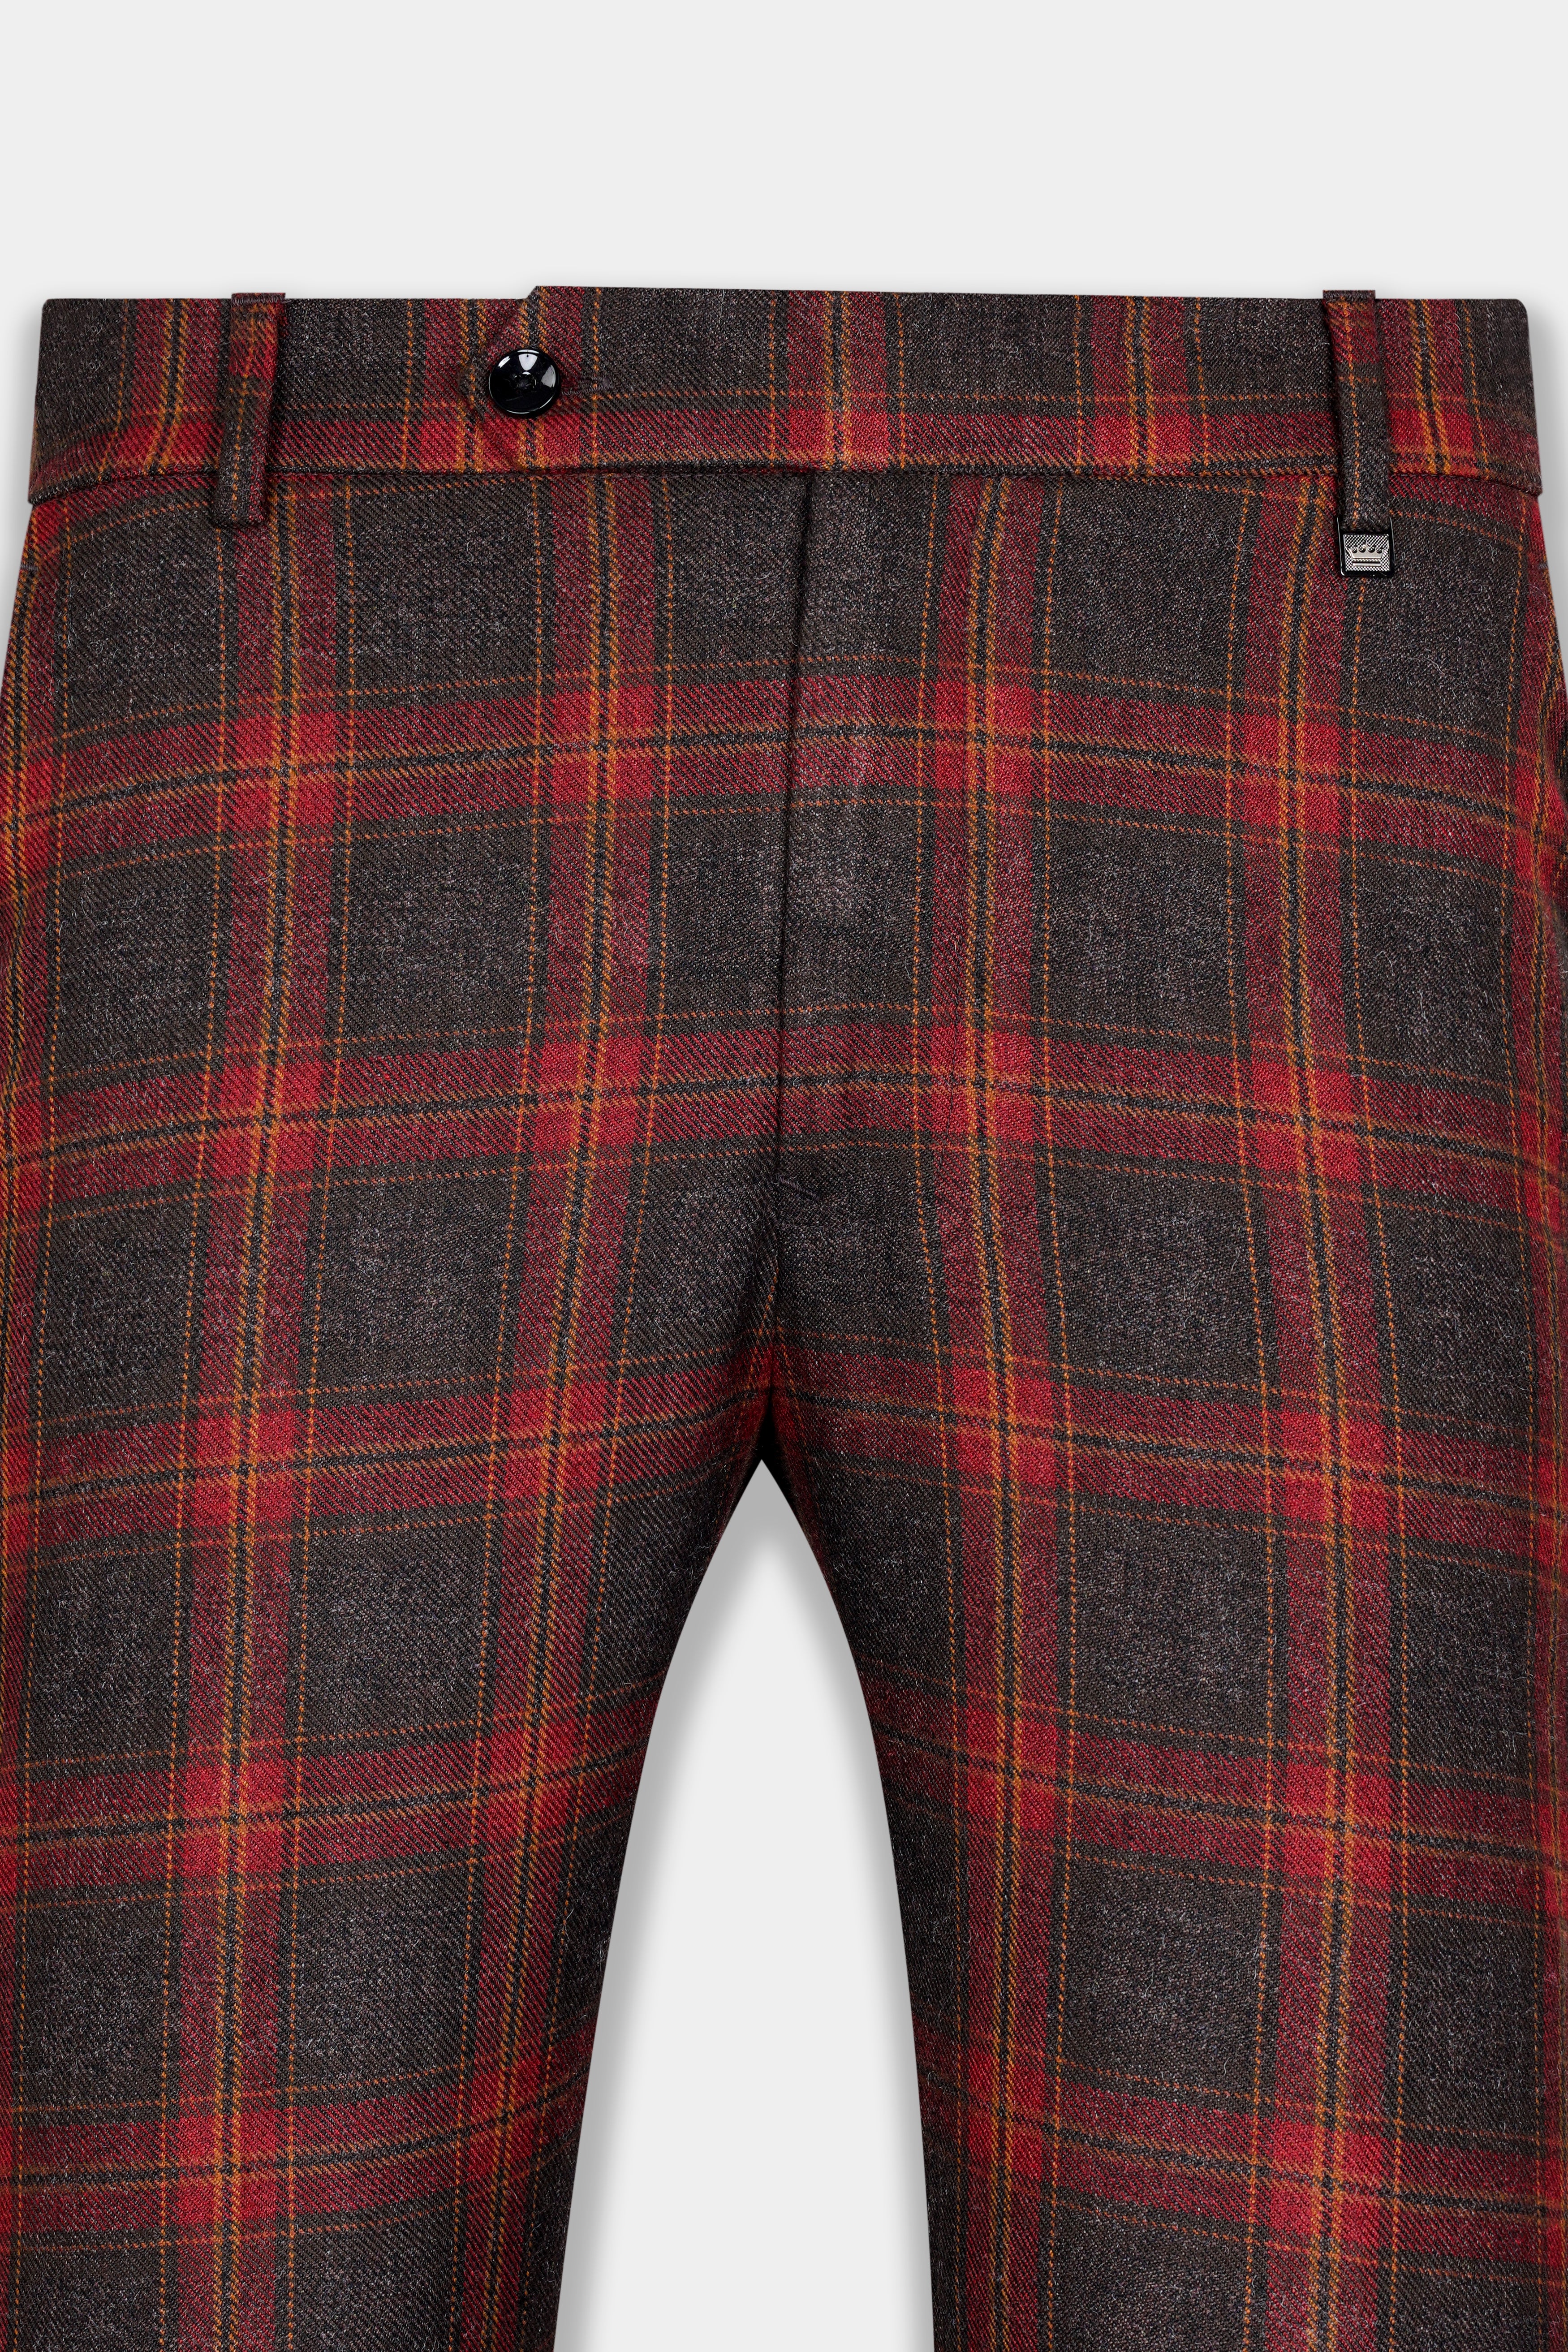 Claret Red and Walnut Brown Tweed Plaid Pant T2918-SW-28, T2918-SW-30, T2918-SW-32, T2918-SW-34, T2918-SW-36, T2918-SW-38, T2918-SW-40, T2918-SW-42, T2918-SW-44